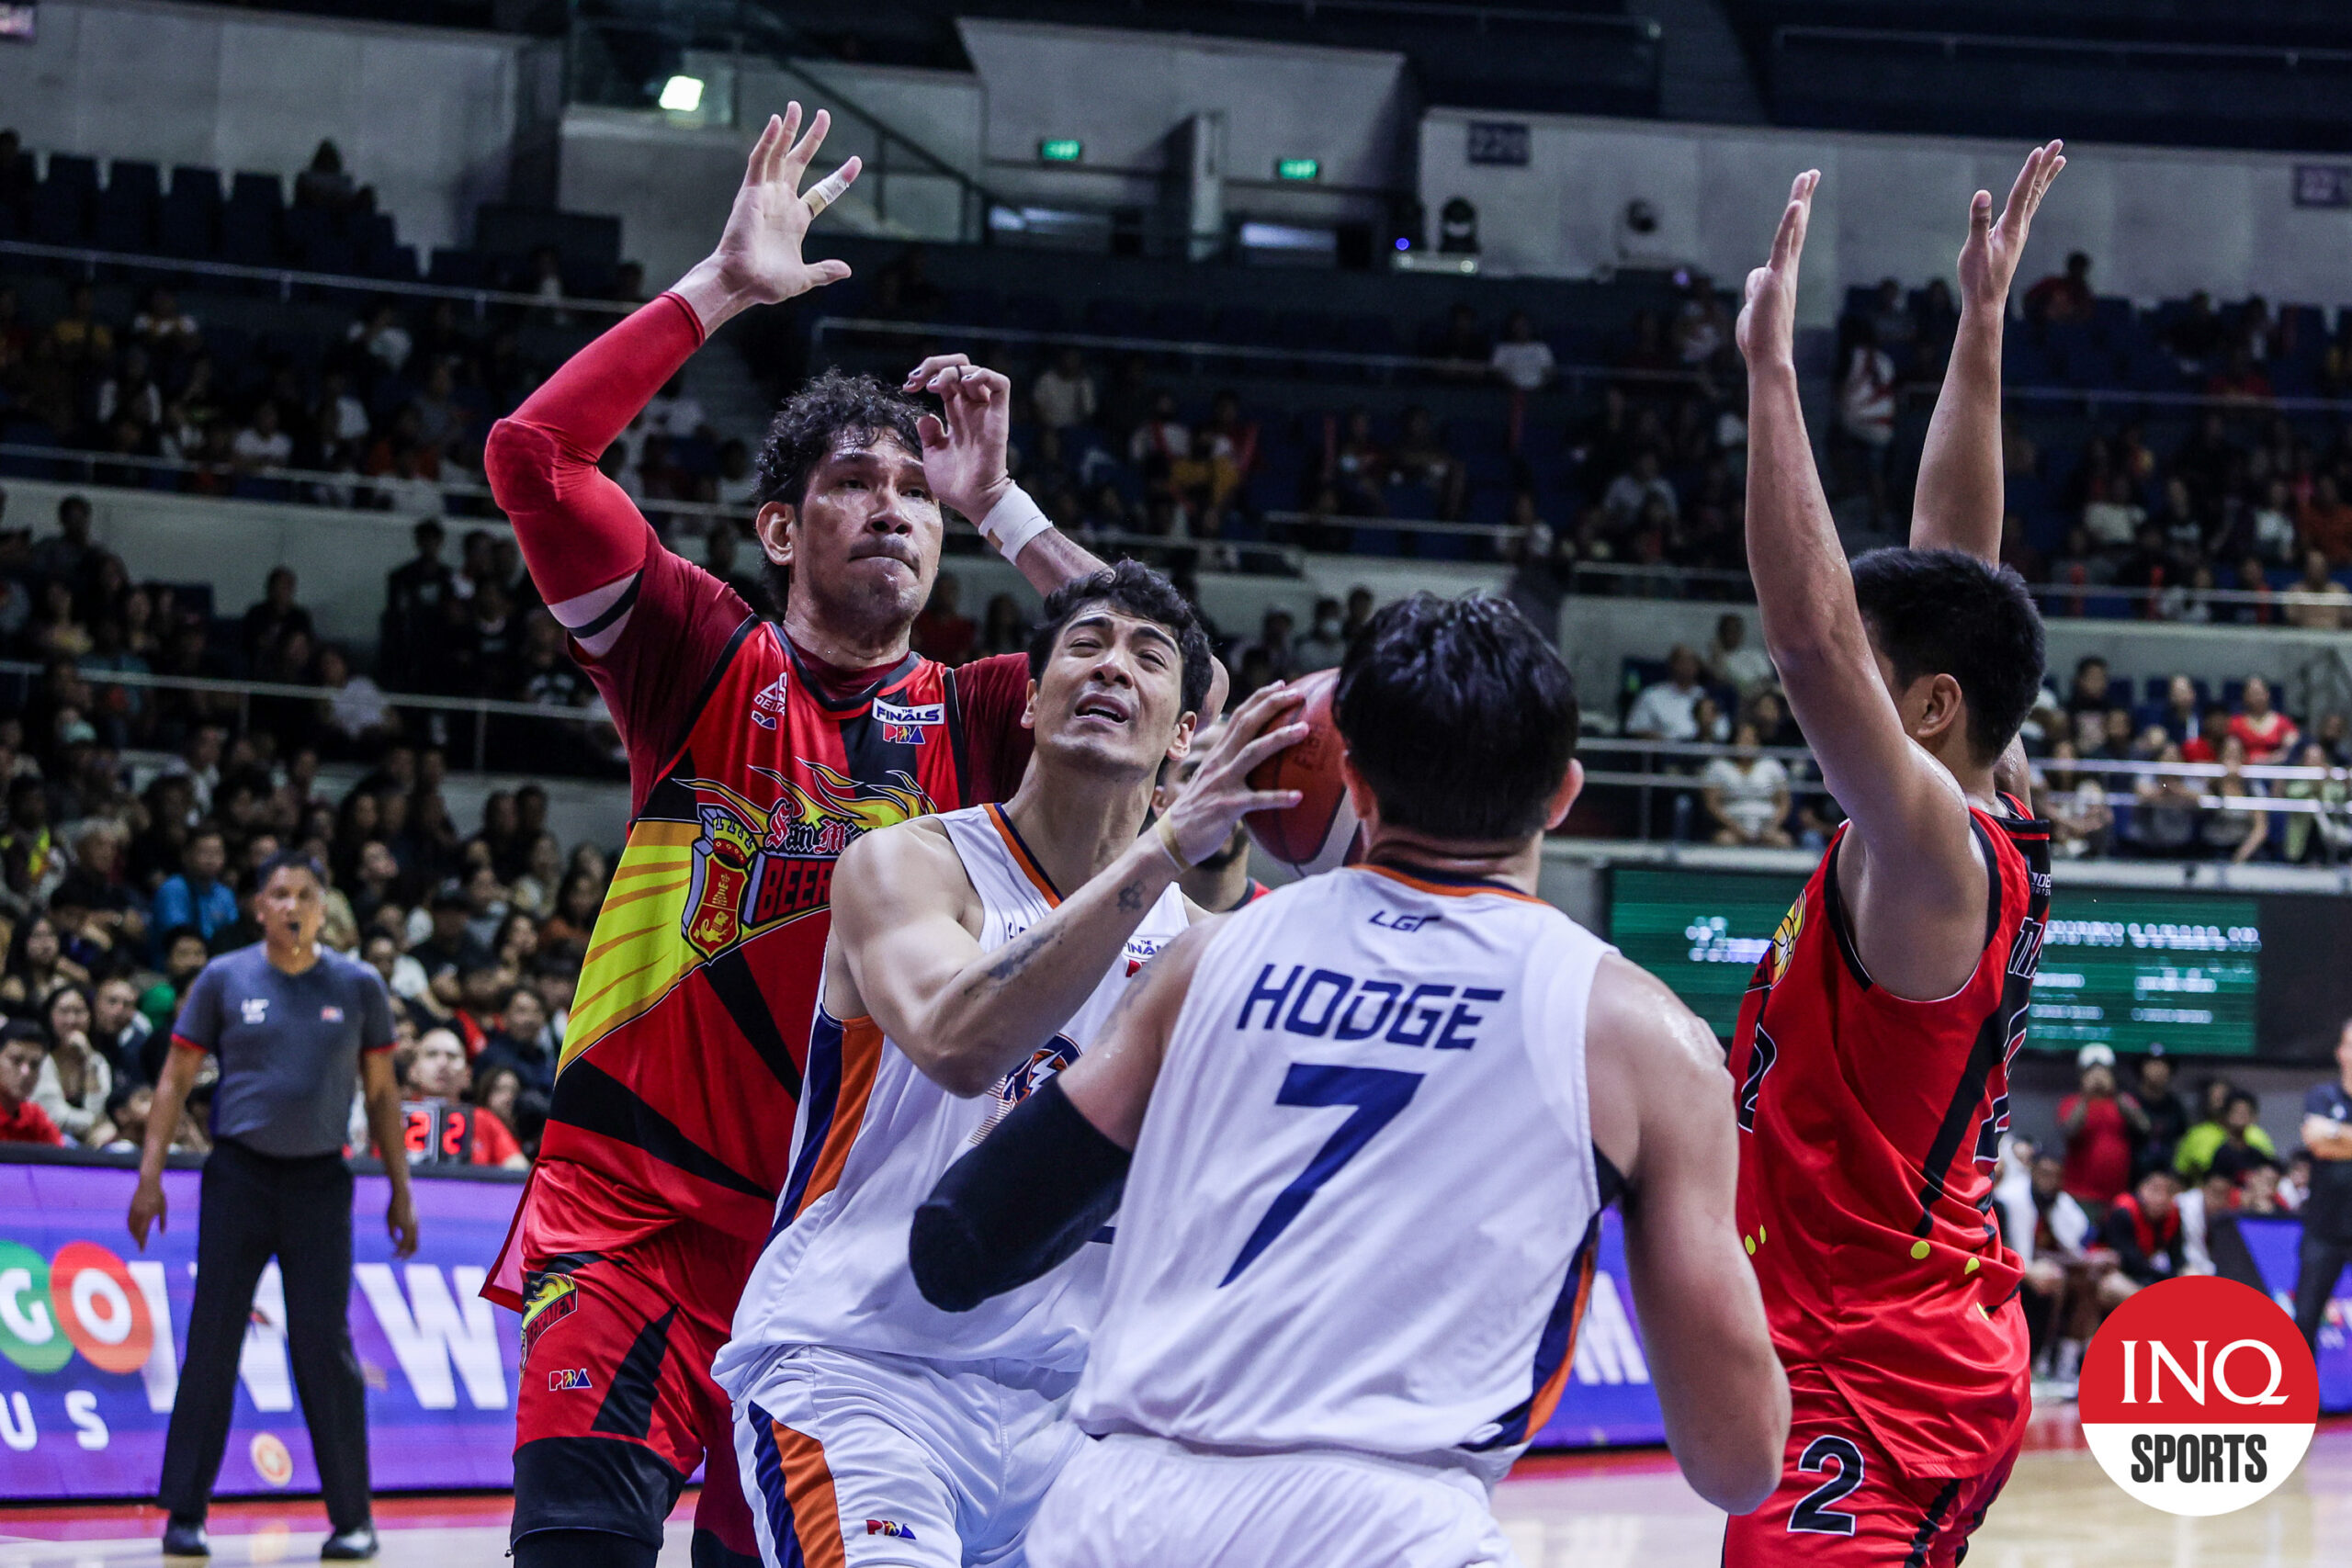 Meralco Bolts' Brandon Bates against San Miguel defenders in the PBA Philippine Cup Finals.